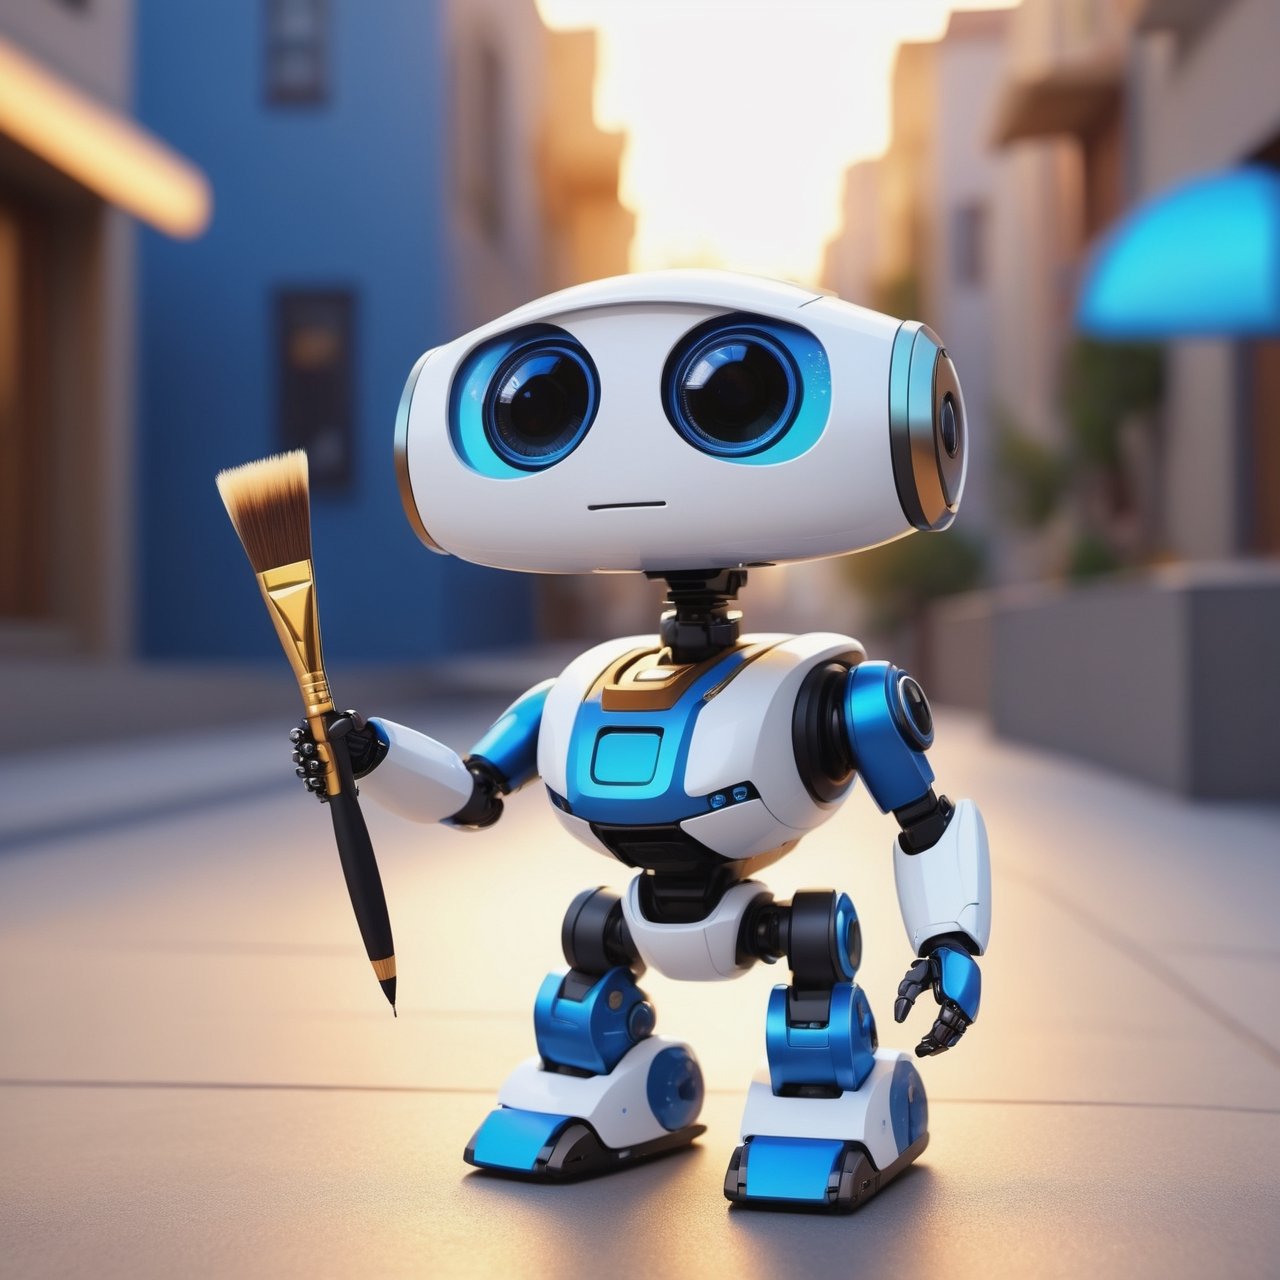 (masterpiece:1.2, highest quality), (realistic, photo_realistic:1.9)
1chibi_robot, Cute chibi robot, happy face, (Designer look holding a paintbrush in one hand), white with blue, (detailed background), (gradients), colorful, detailed landscape, visual key, shiny skin. Modern place, Action camera. Portrait film. Standard lens. Golden hour lighting.
sharp focus, 8k, UHD, high quality, frowning, intricate detailed, highly detailed, hyper-realistic,interior,robot white with blue,chibi emote style,Monster, wall-e